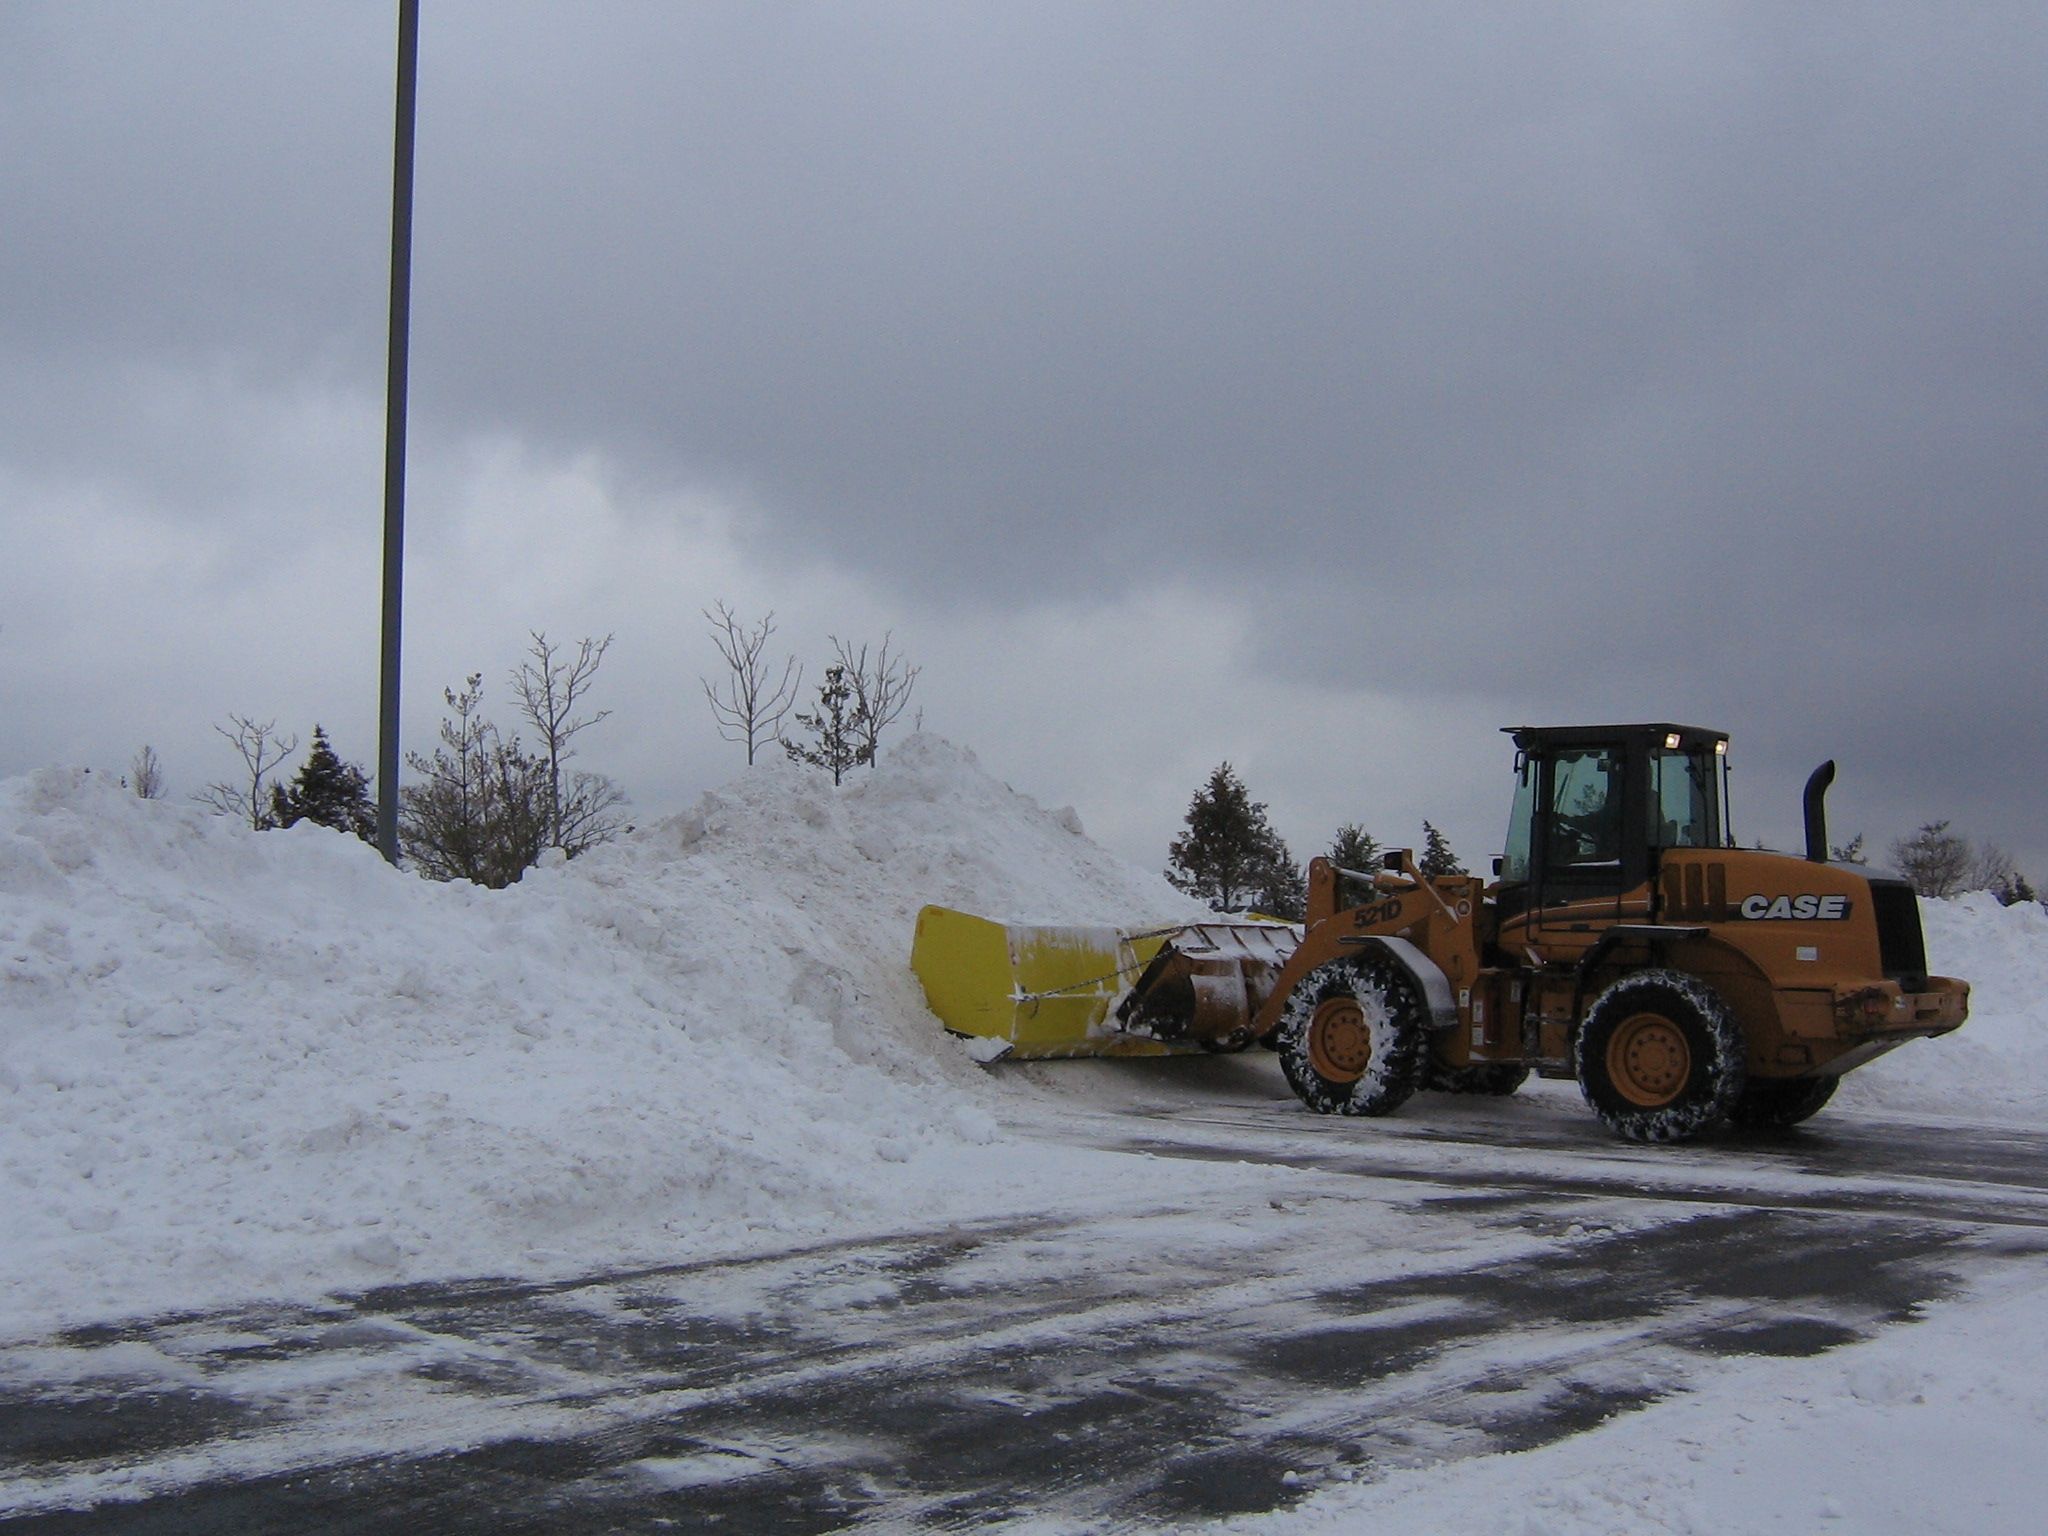 plow clearing snow in parking lot